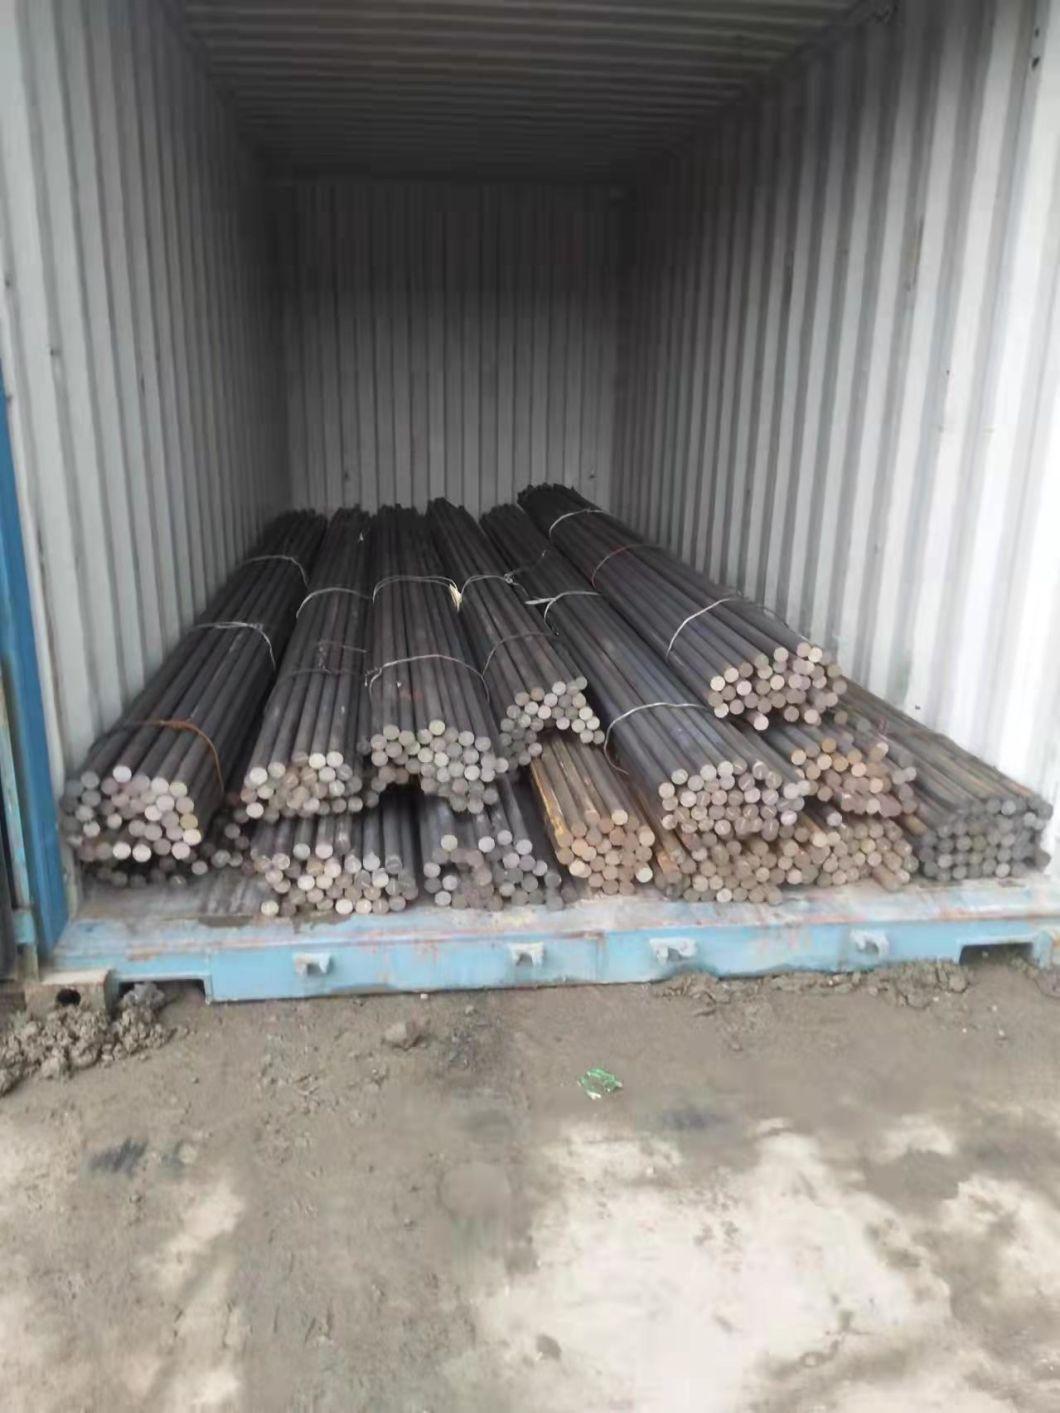 Hot Rolled a-36 4140 42CrMo 6meters 3 Inch Diameter Steel Round Bar Price Philippines